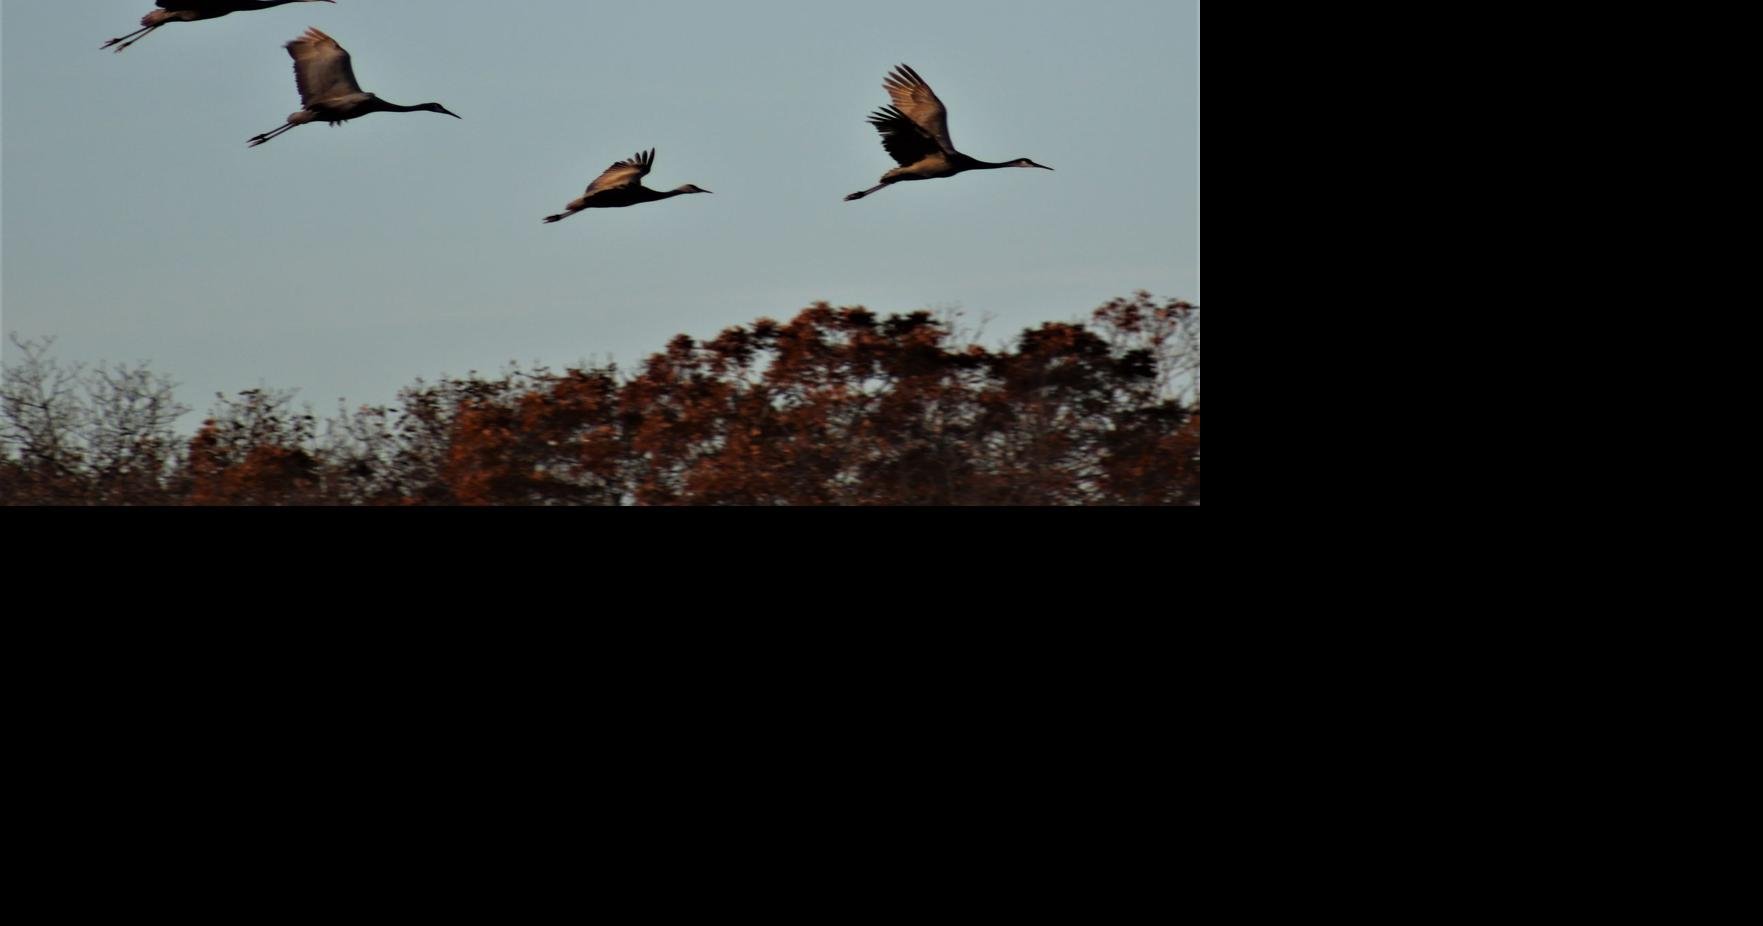 While common, sandhill cranes are nothing short of extraordinary